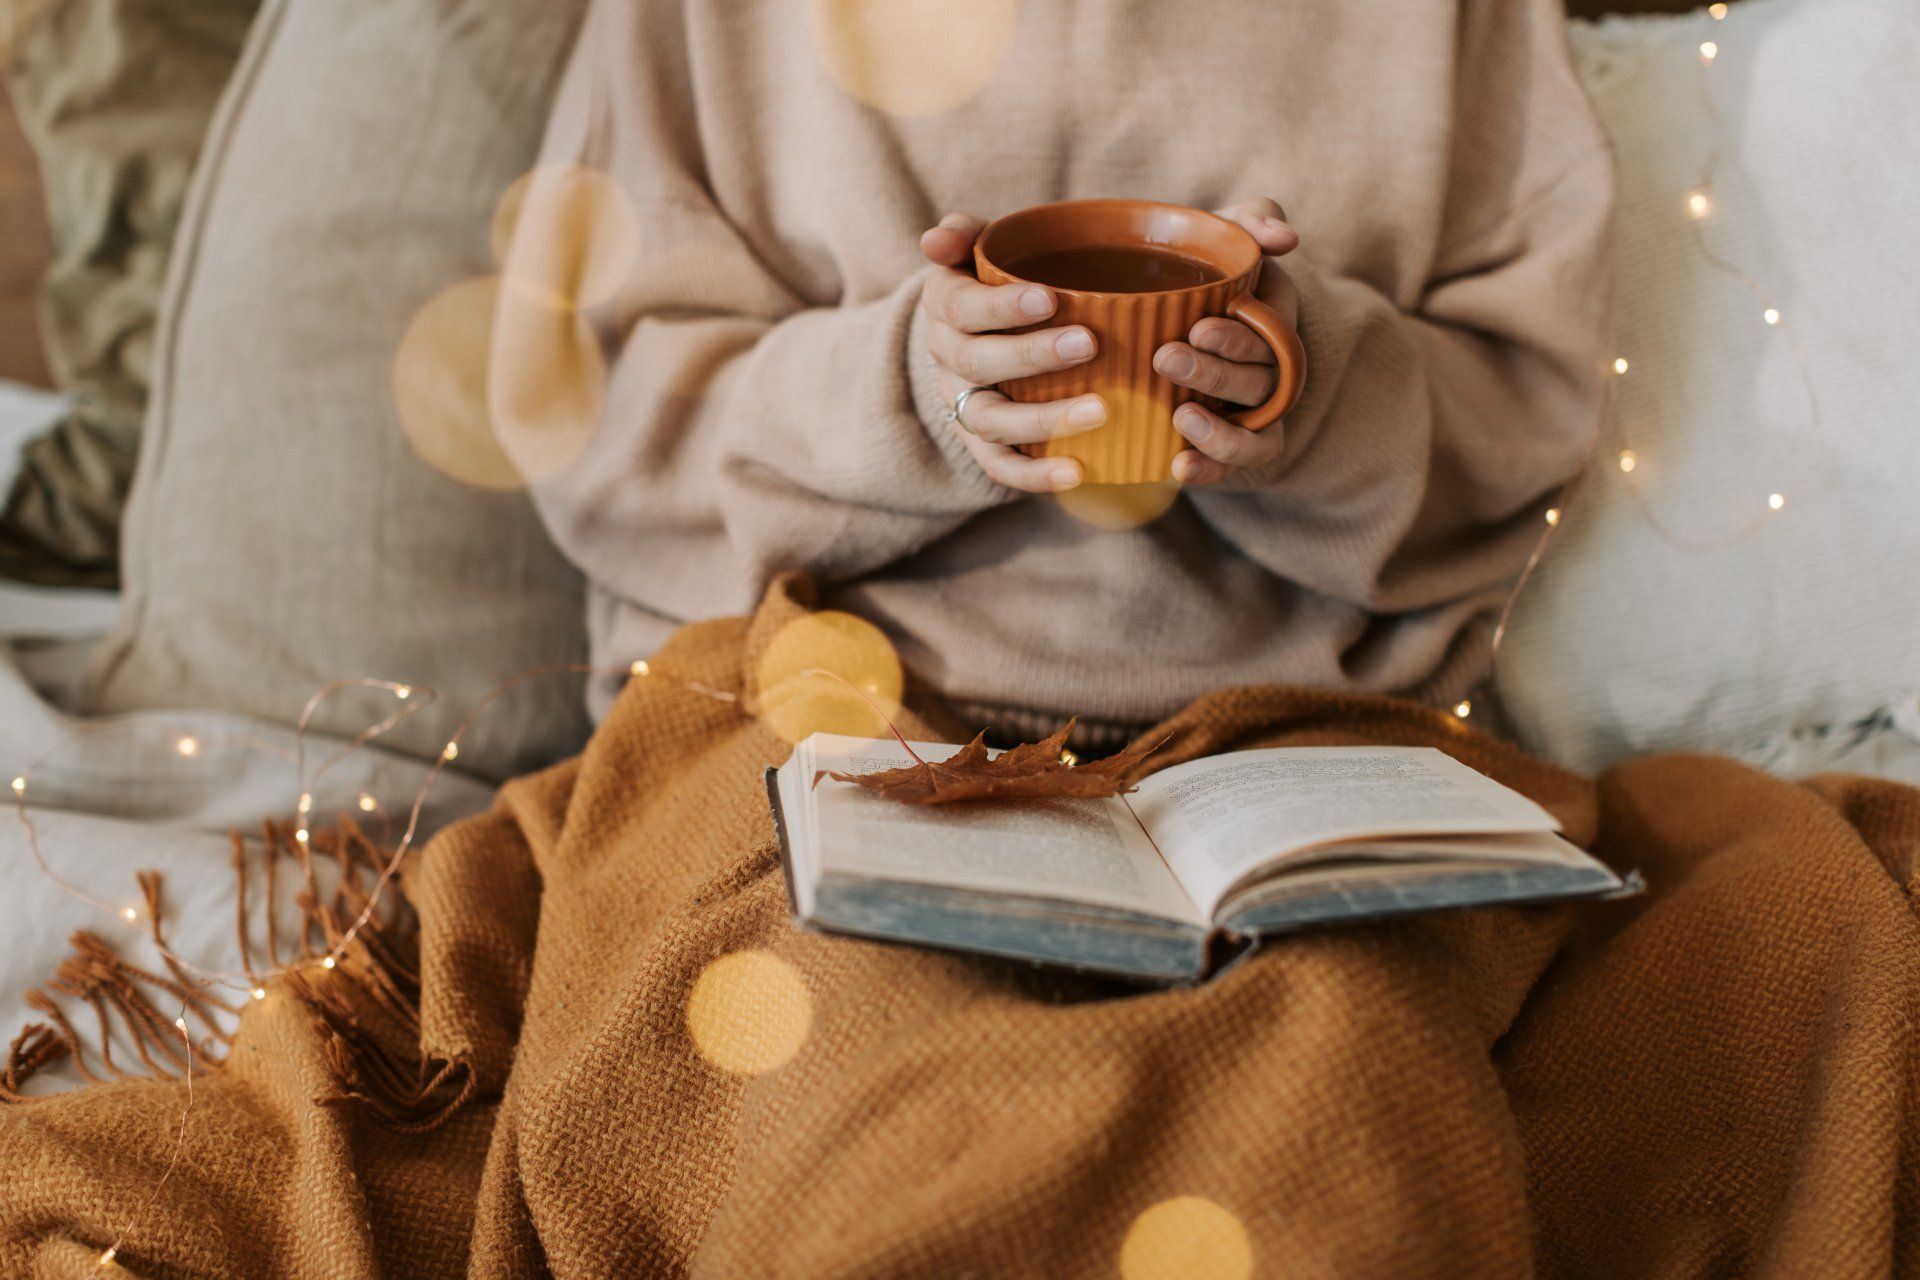 person holding a mug with a book in their lap cozying up on a couch with lights